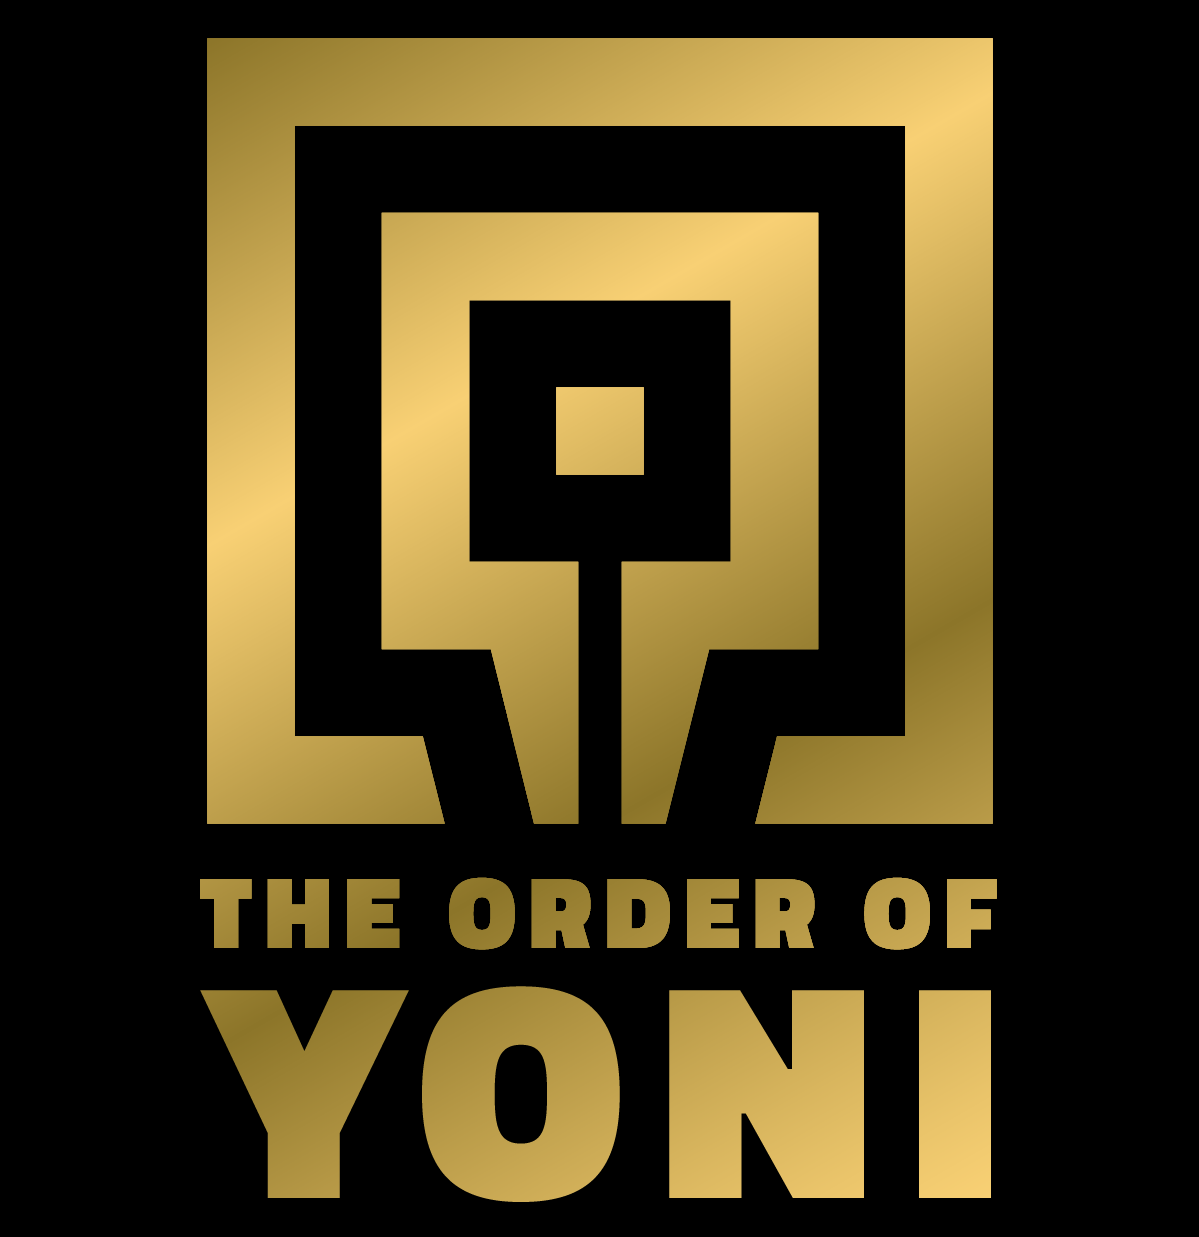 The Order of Yoni